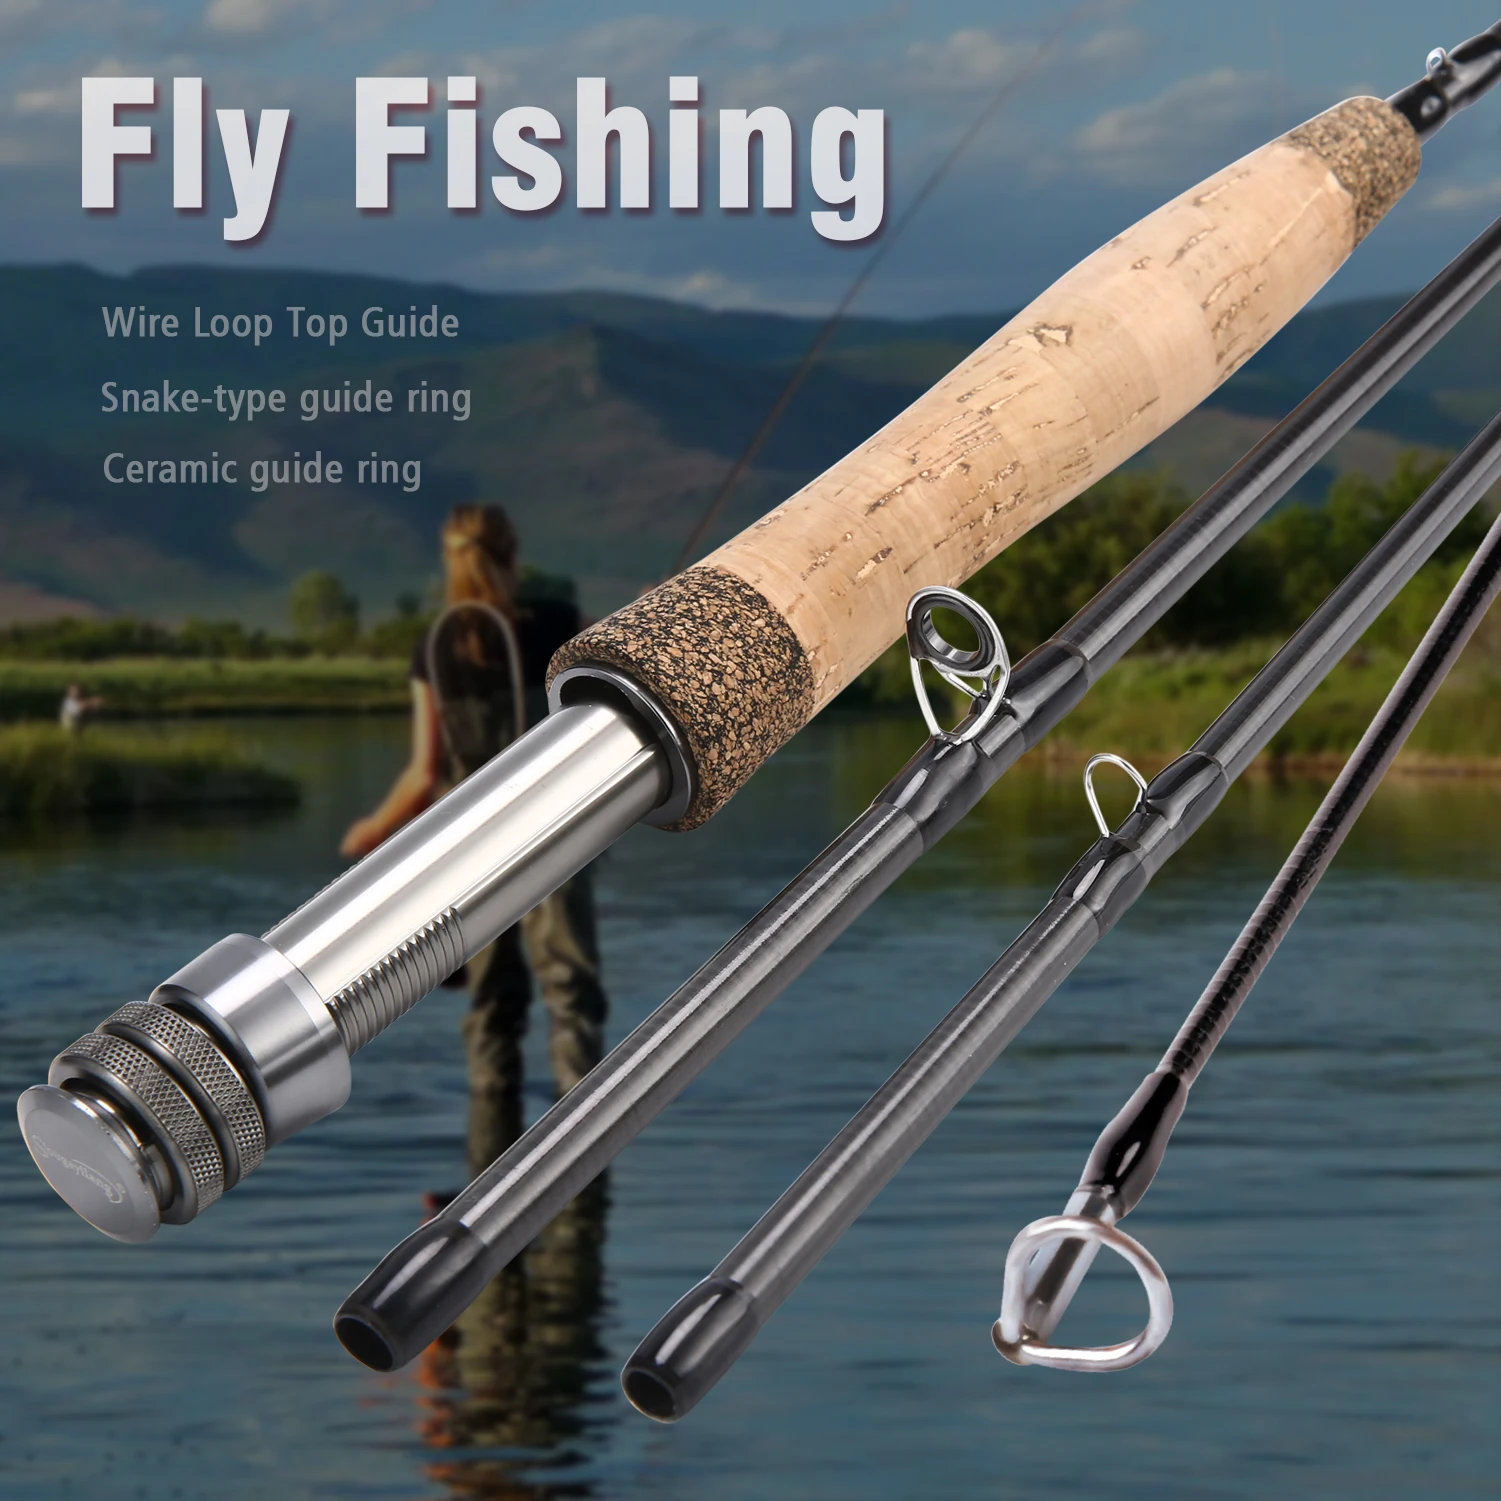 Fly Fishing Rods 4, Trout Fishing Rod, Fly Rod Salmon, Fishing Tackle